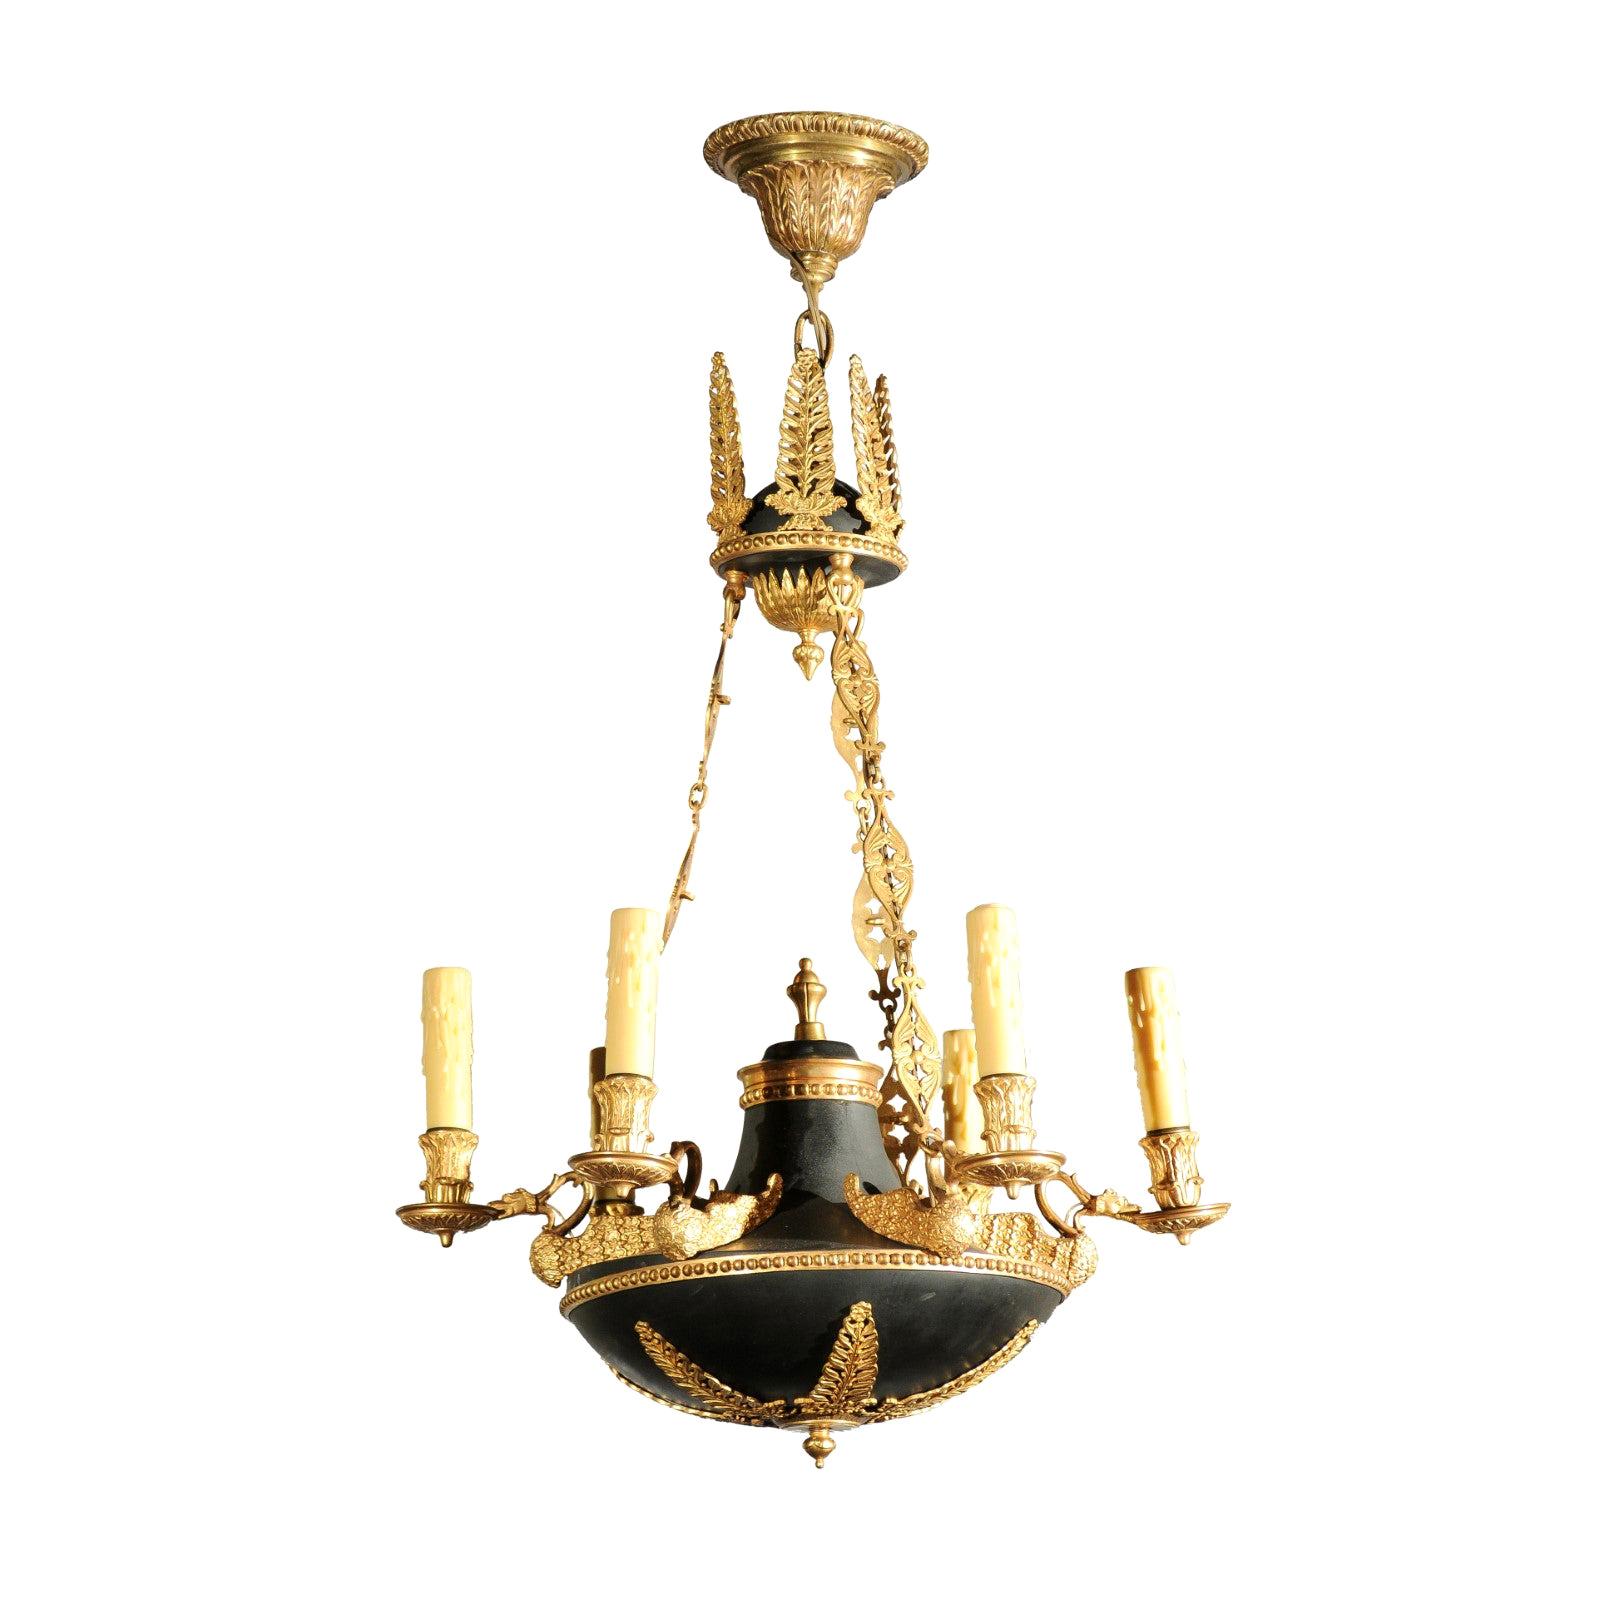 French 1870s Empire Style Bronze and Metal Six-Light Chandelier with Palmettes